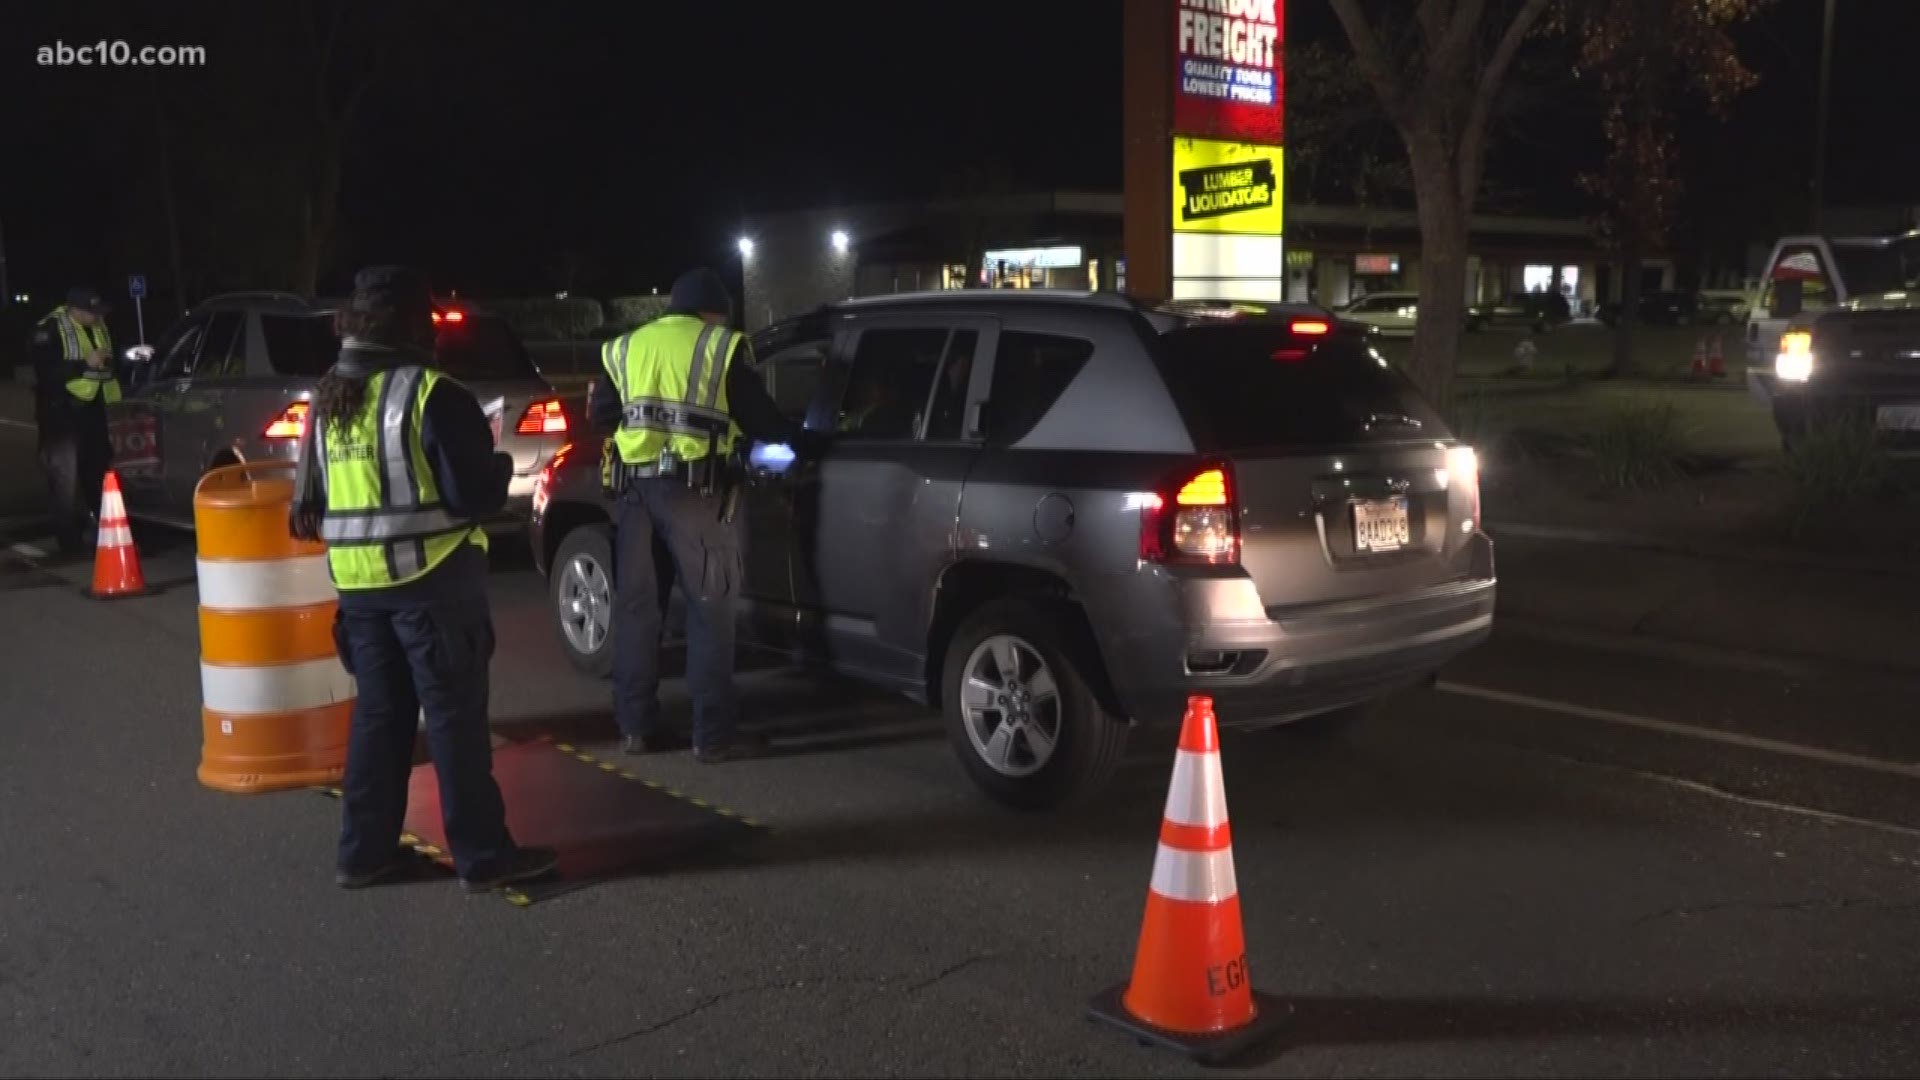 Officers with departments across the region will be on the lookout for impaired drivers and those driving under the influence of alcohol or drugs throughout the New Year's holiday.